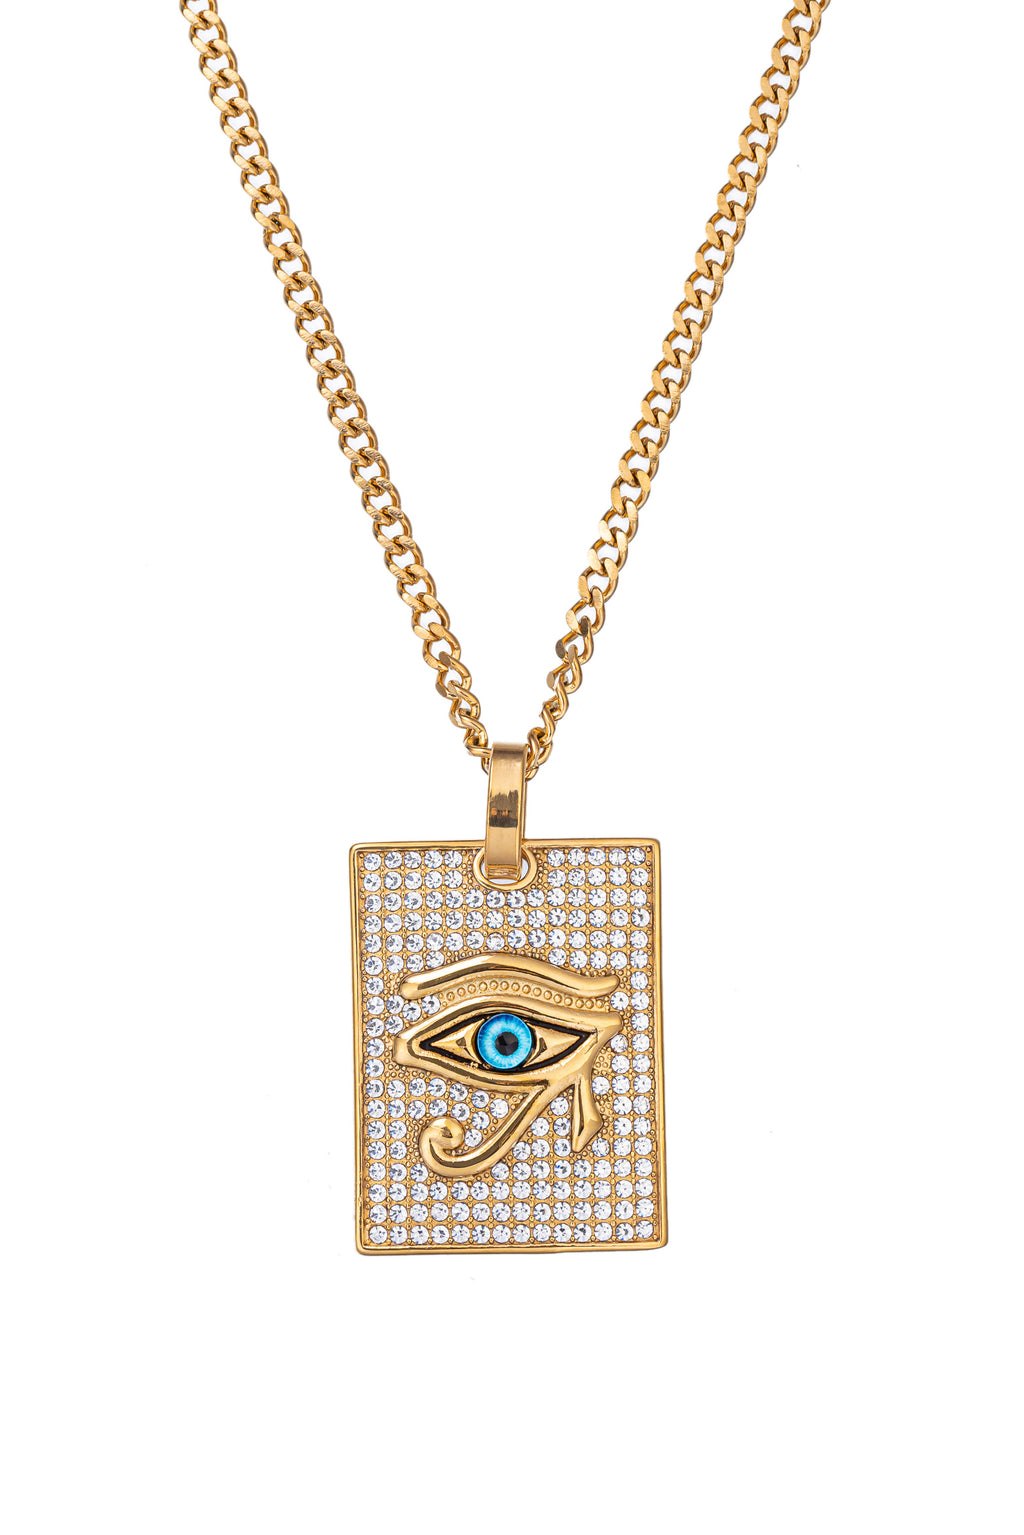 Gold tone titanium square eye pendant necklace studded with CZ crystals.